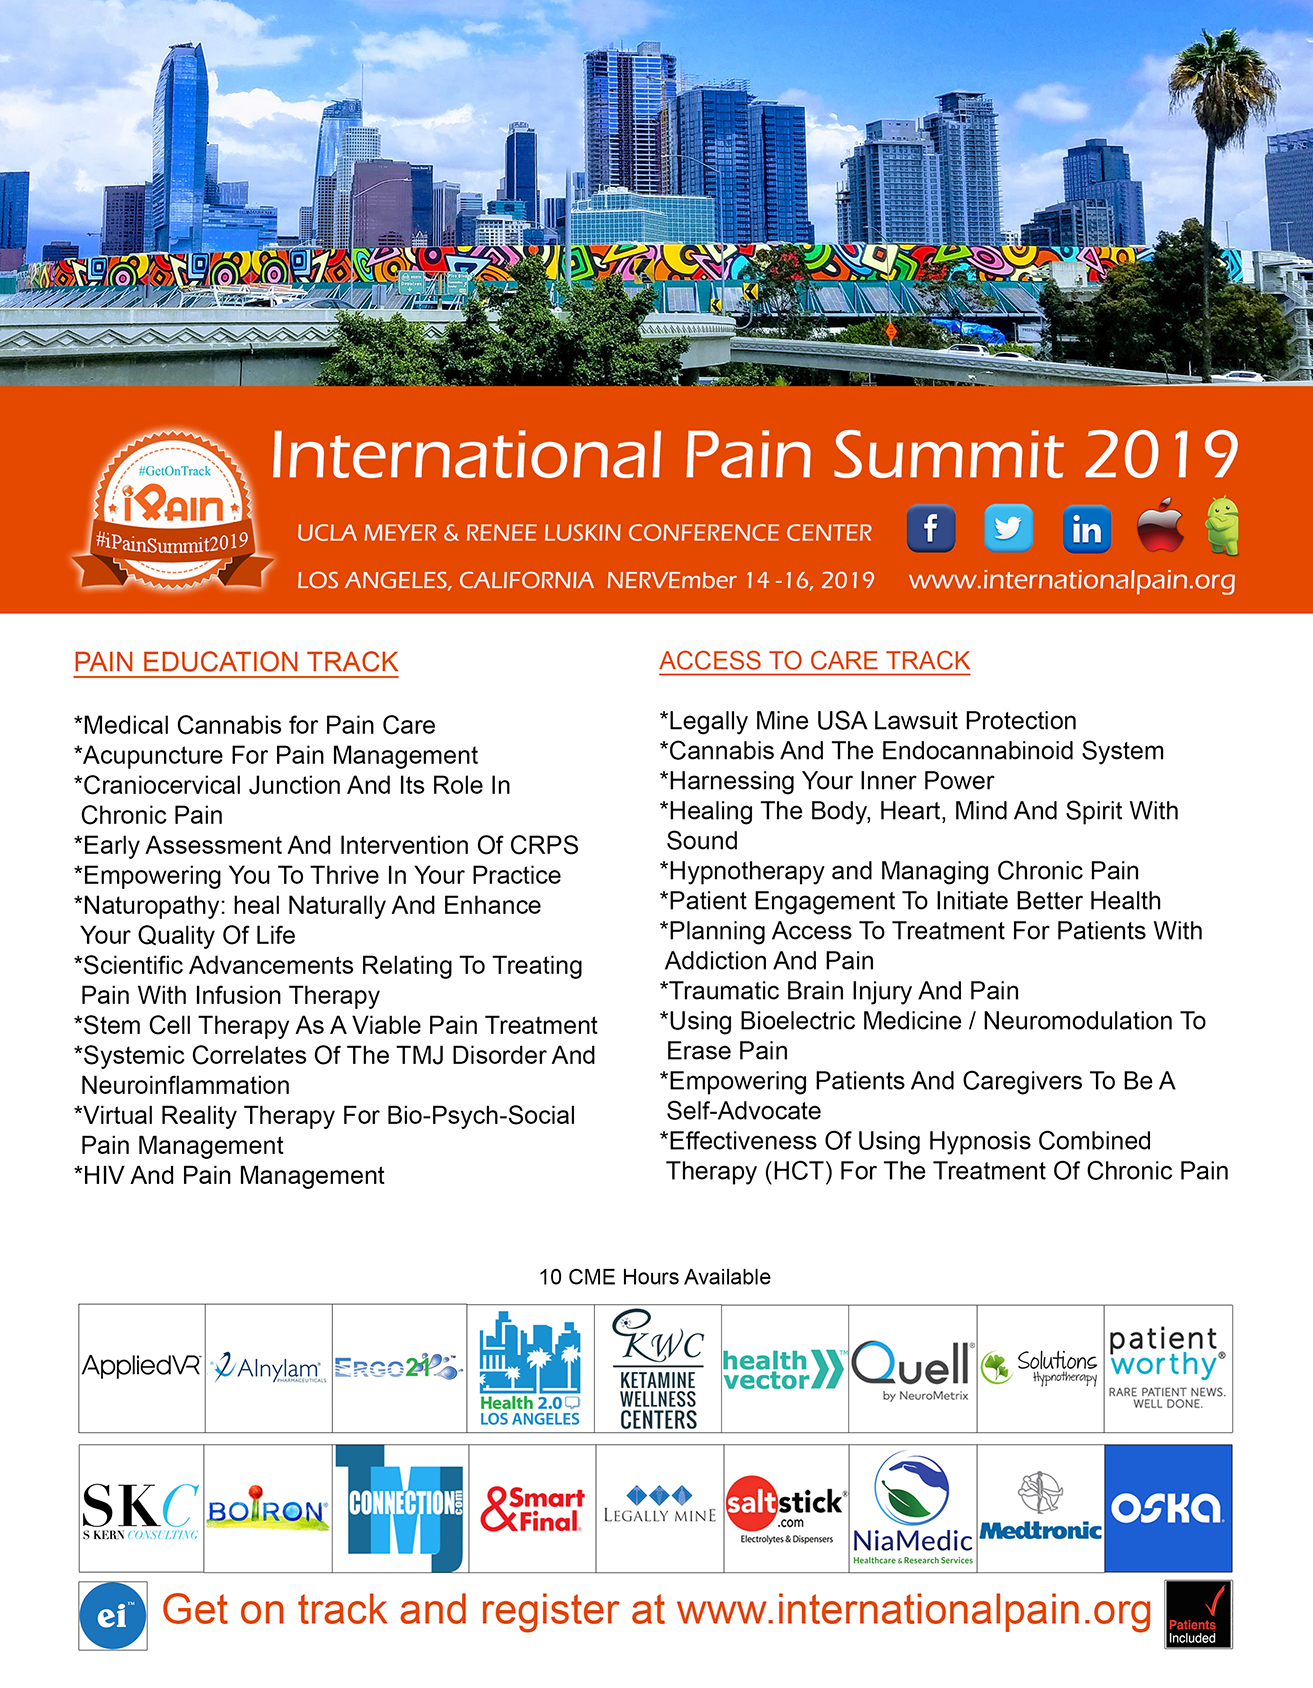 International Pain Foundation is bringing together professionals